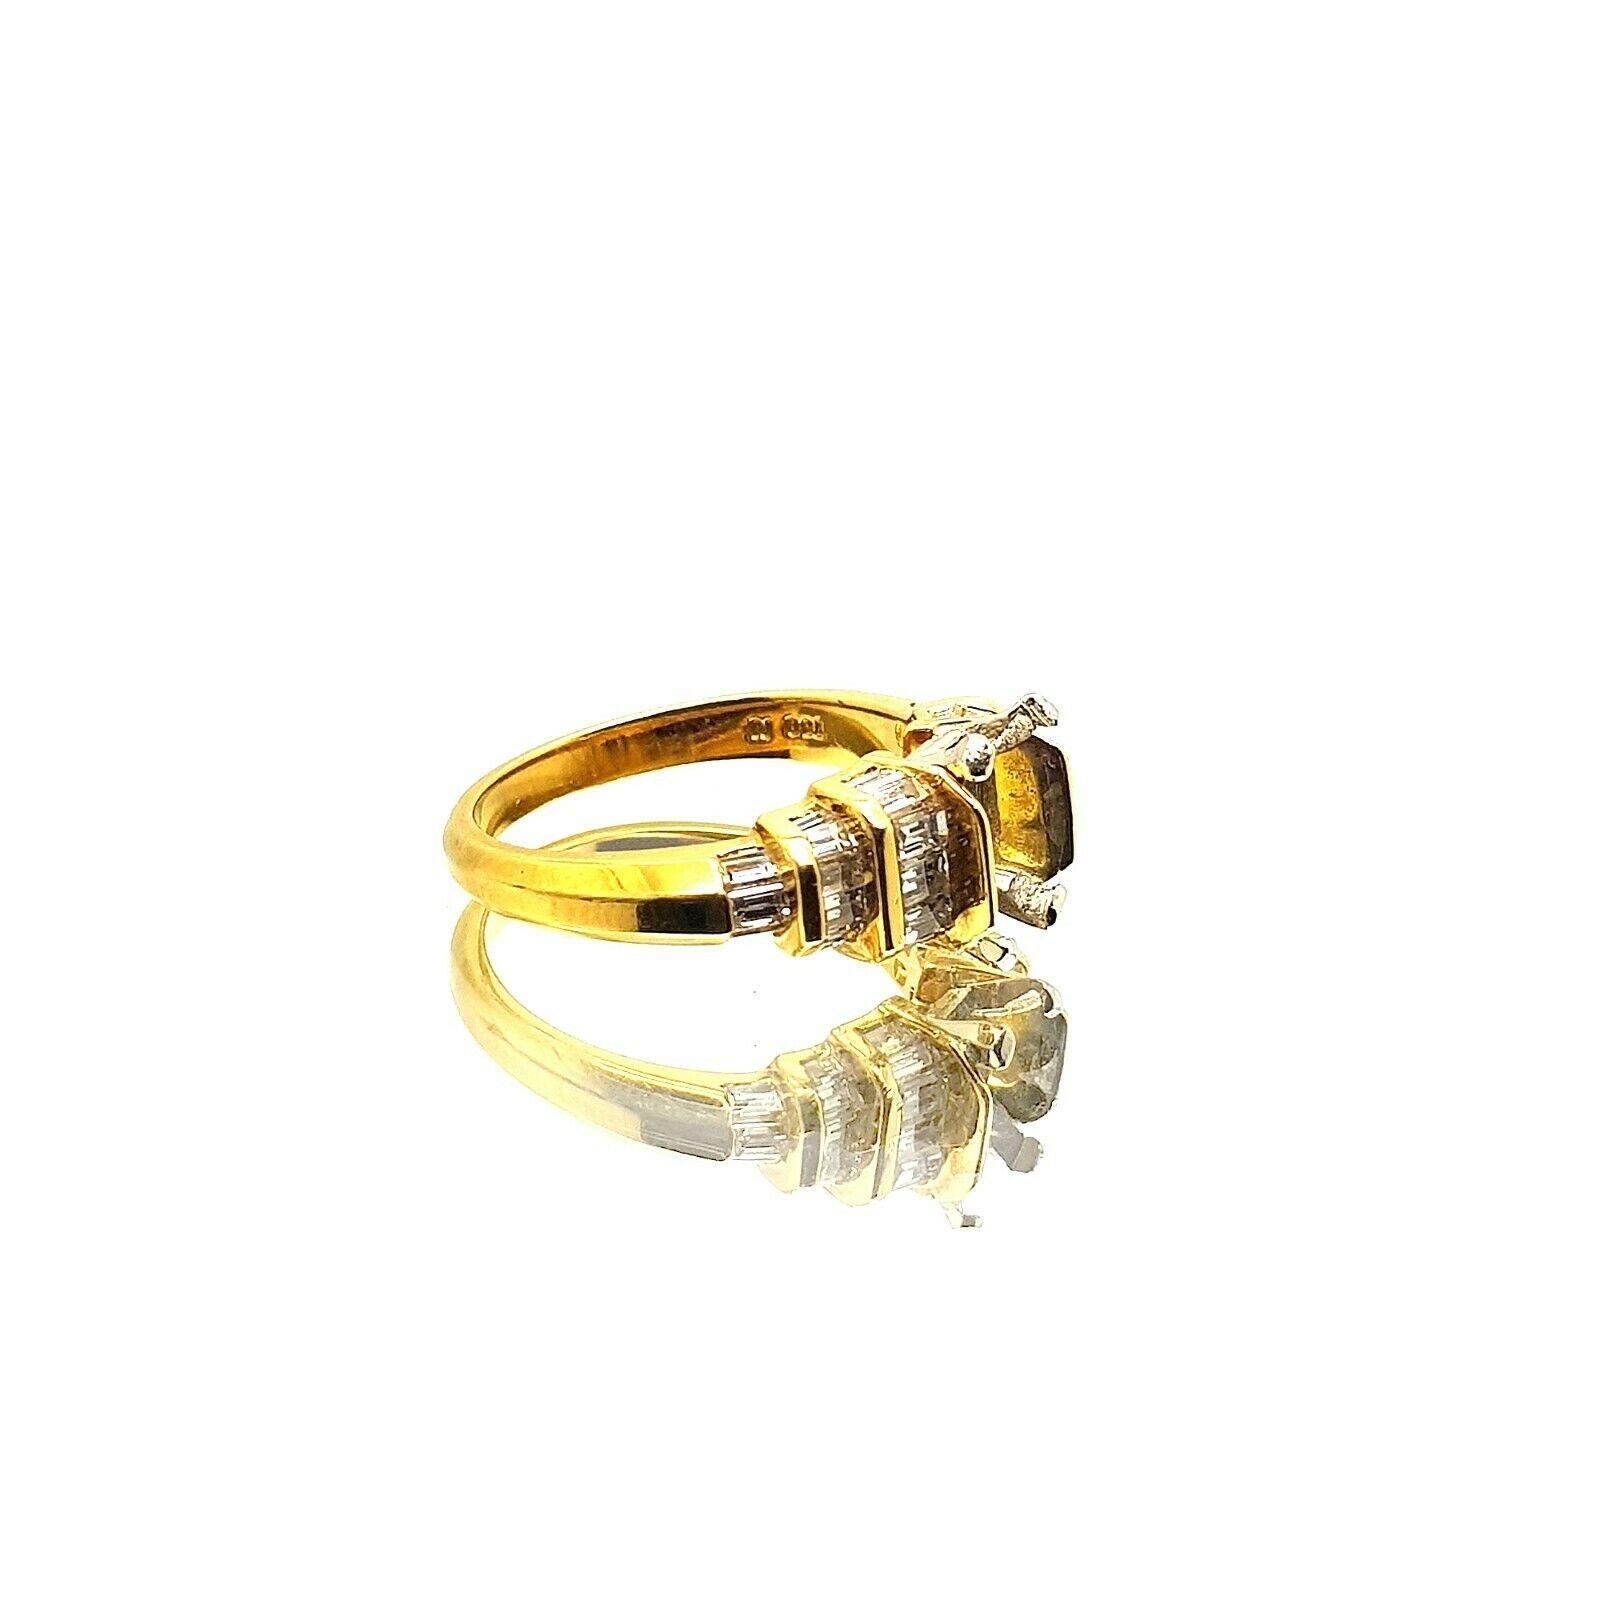  This is a 18K yellow gold mounting ring with baguette diamonds. You can set any stone as a center. The current ring size is 6US, but it can be resized to fit any finger. 
Specifications:
    main stone: CAN BE ANY
    additional: BAGUETTE DIAMONDS
